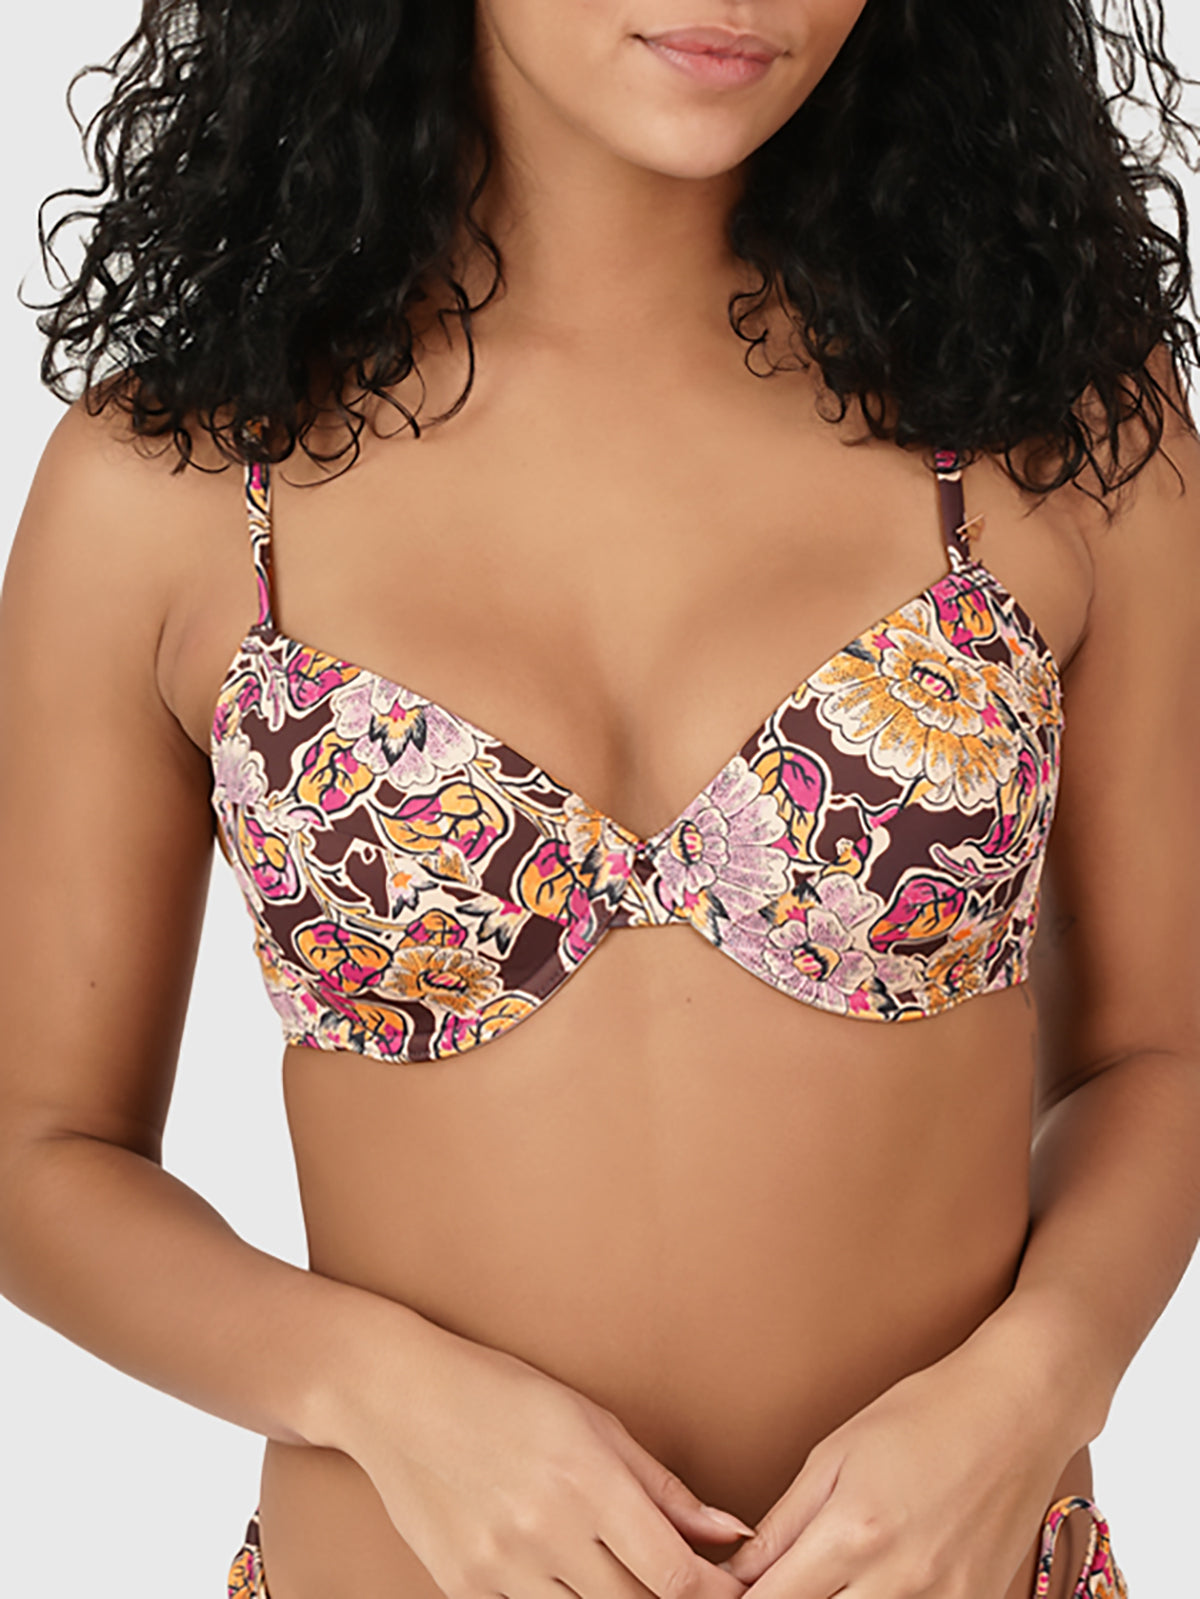 Underwire Moulded Bikini Top for Women from Brunotti in Sakai Flower Print iwth Brown, Orange and Pink colors